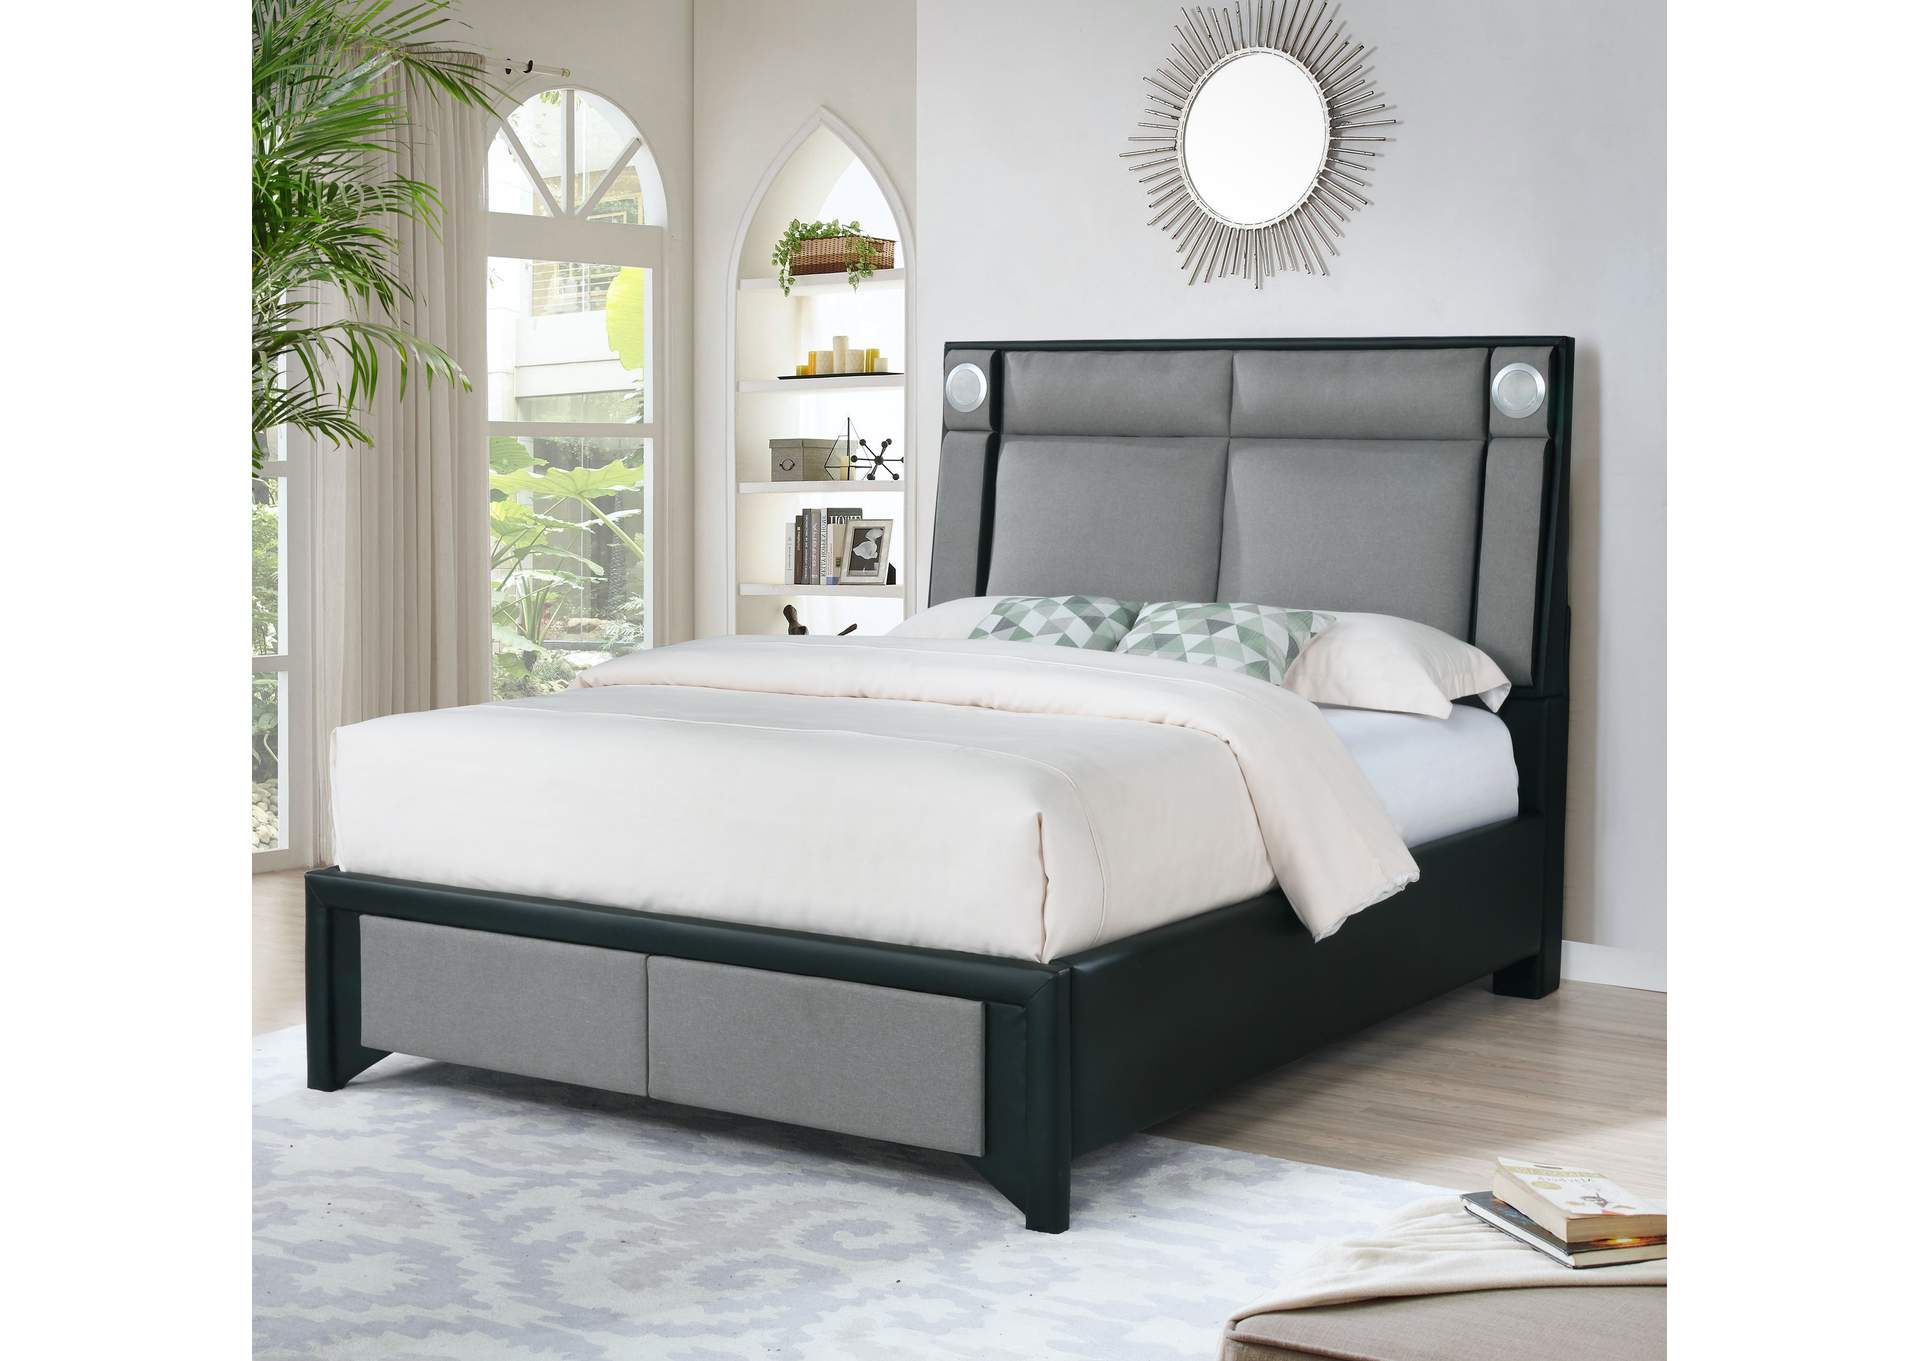 Melody Full Bed,Galaxy Home Furniture